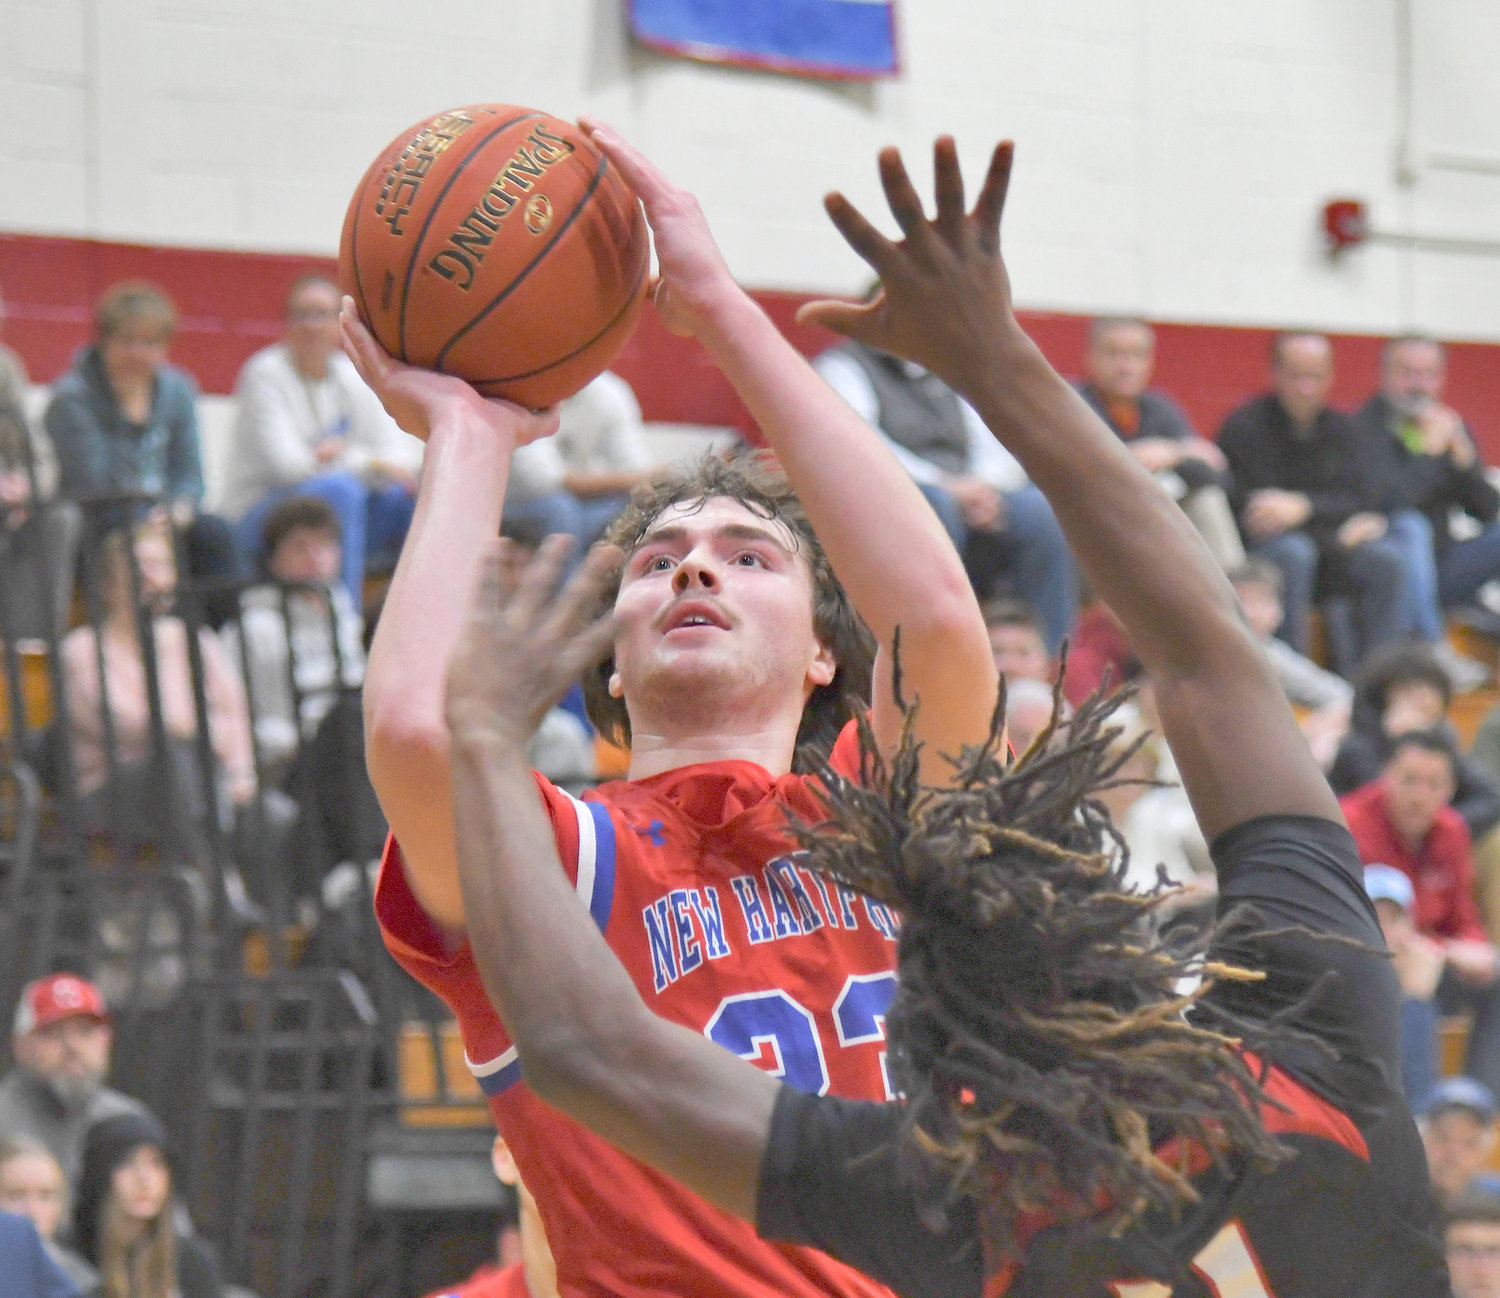 New Hartford senior Zach Philipkoski finished with 32 points on Tuesday to help him become the school’s all-time scoring leader.